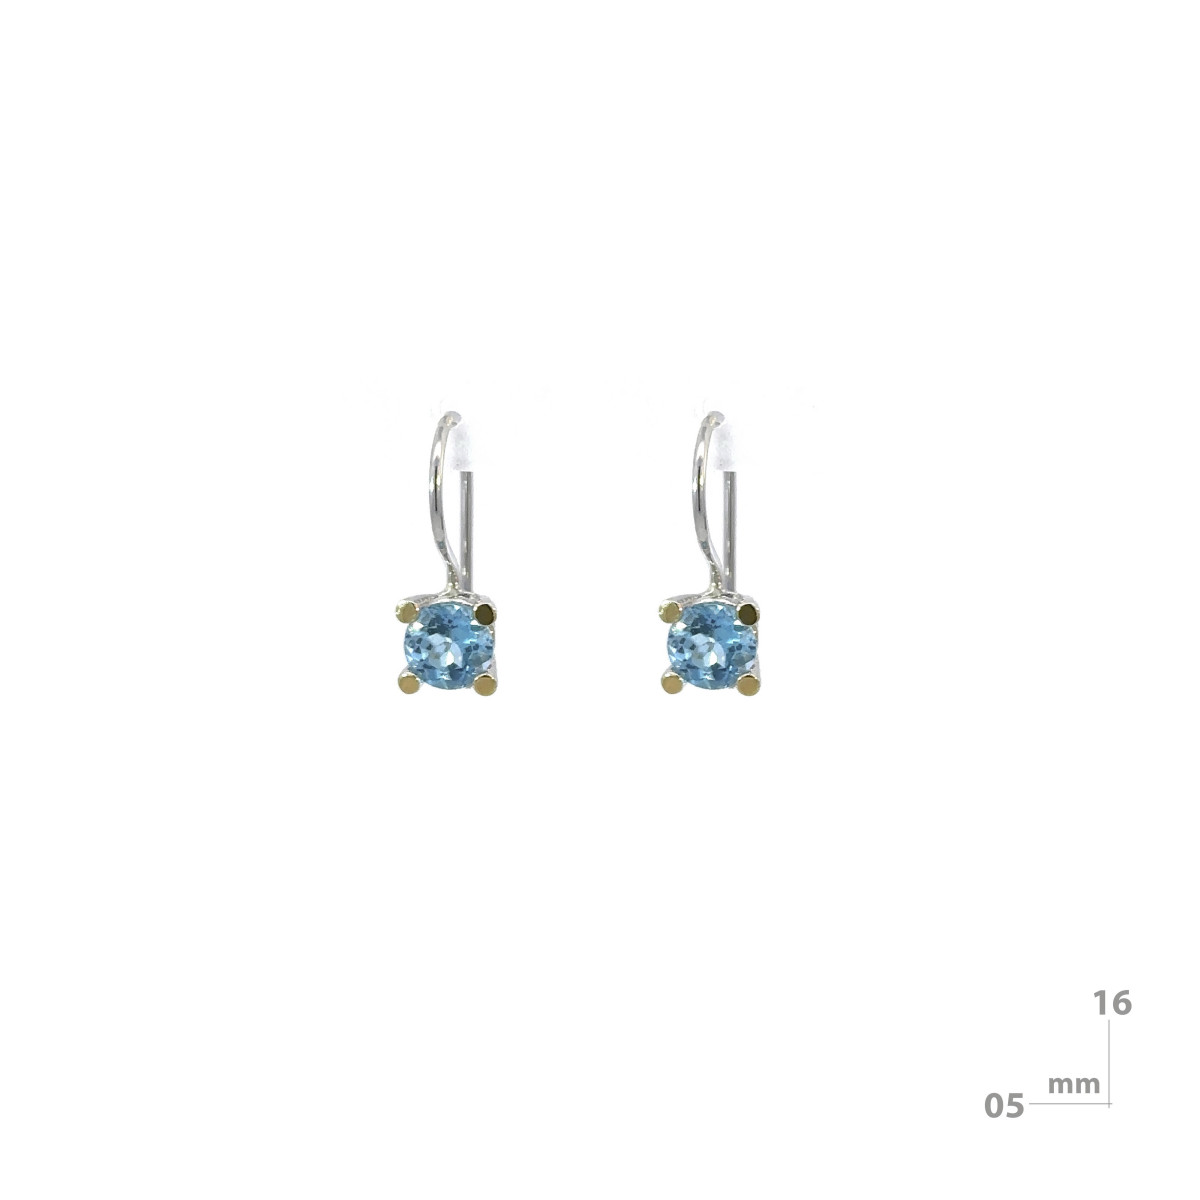 Silver, gold and topaz earrings